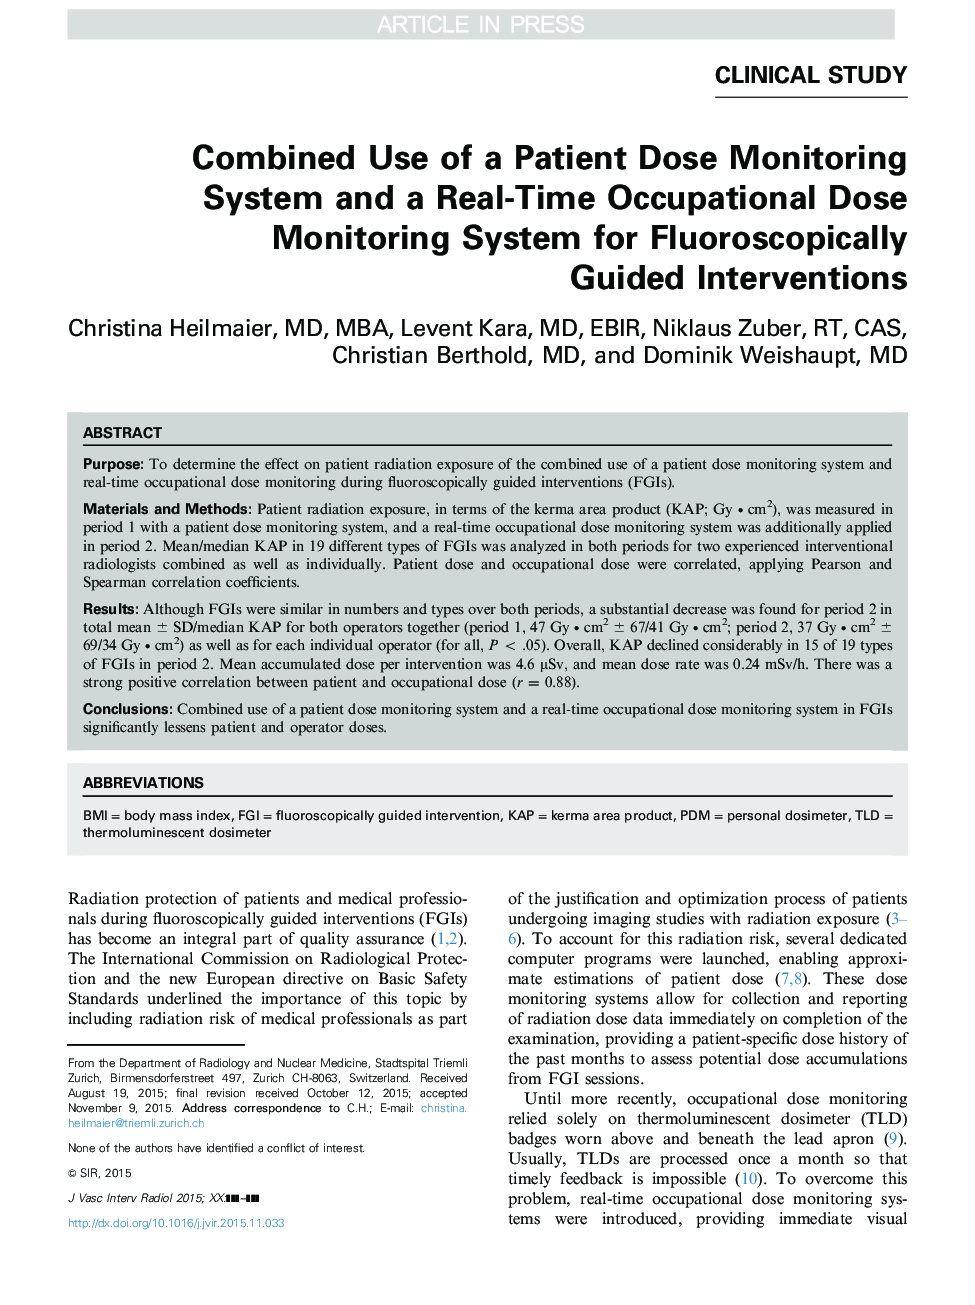 Combined Use of a Patient Dose Monitoring System and a Real-Time Occupational Dose Monitoring System for Fluoroscopically Guided Interventions